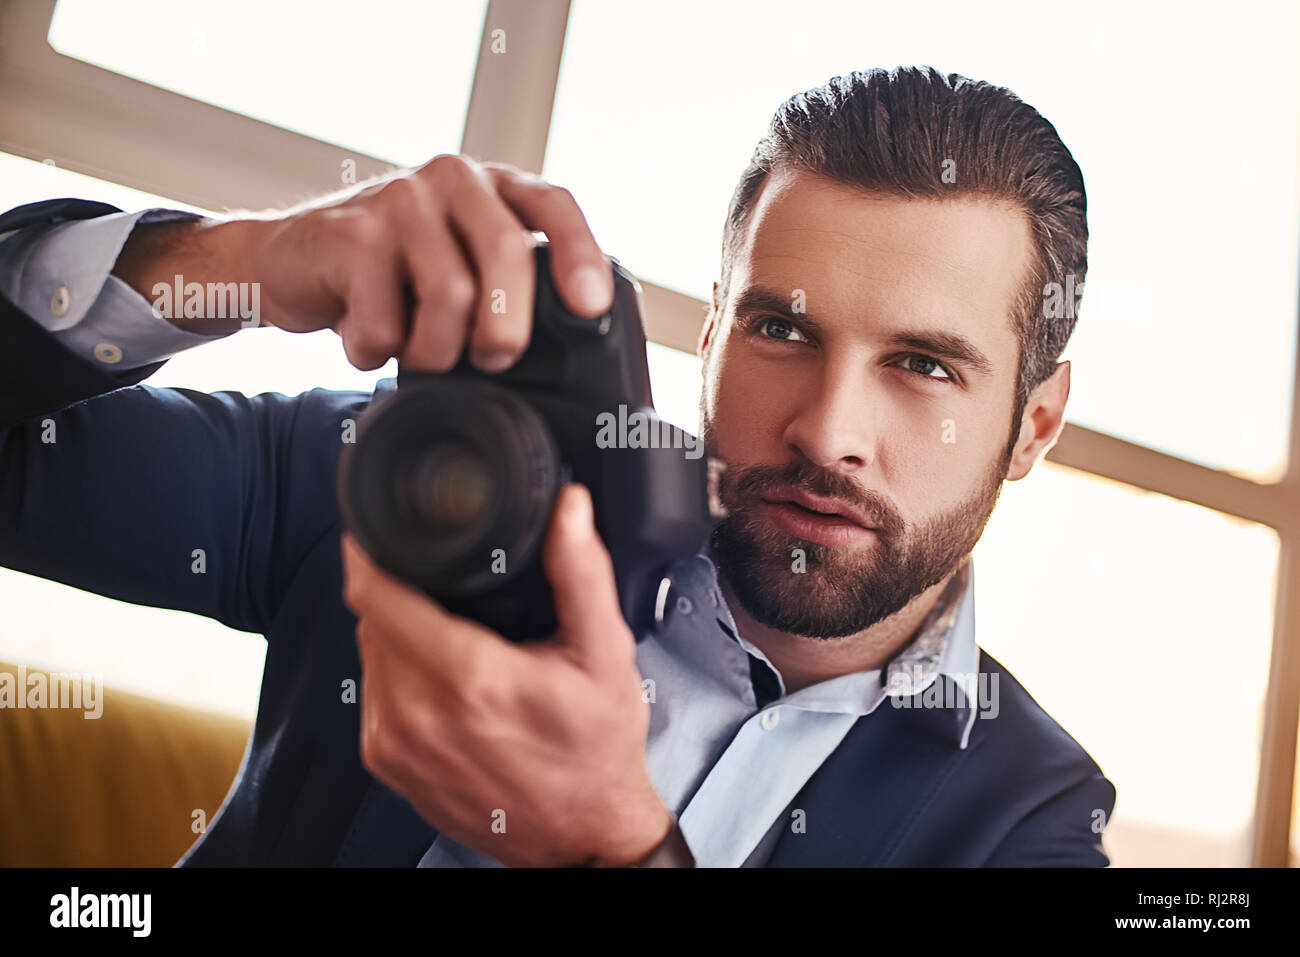 Handsome young businessman in stylish suit is holding camera and going to make a photo. Business look. Close-up Stock Photo